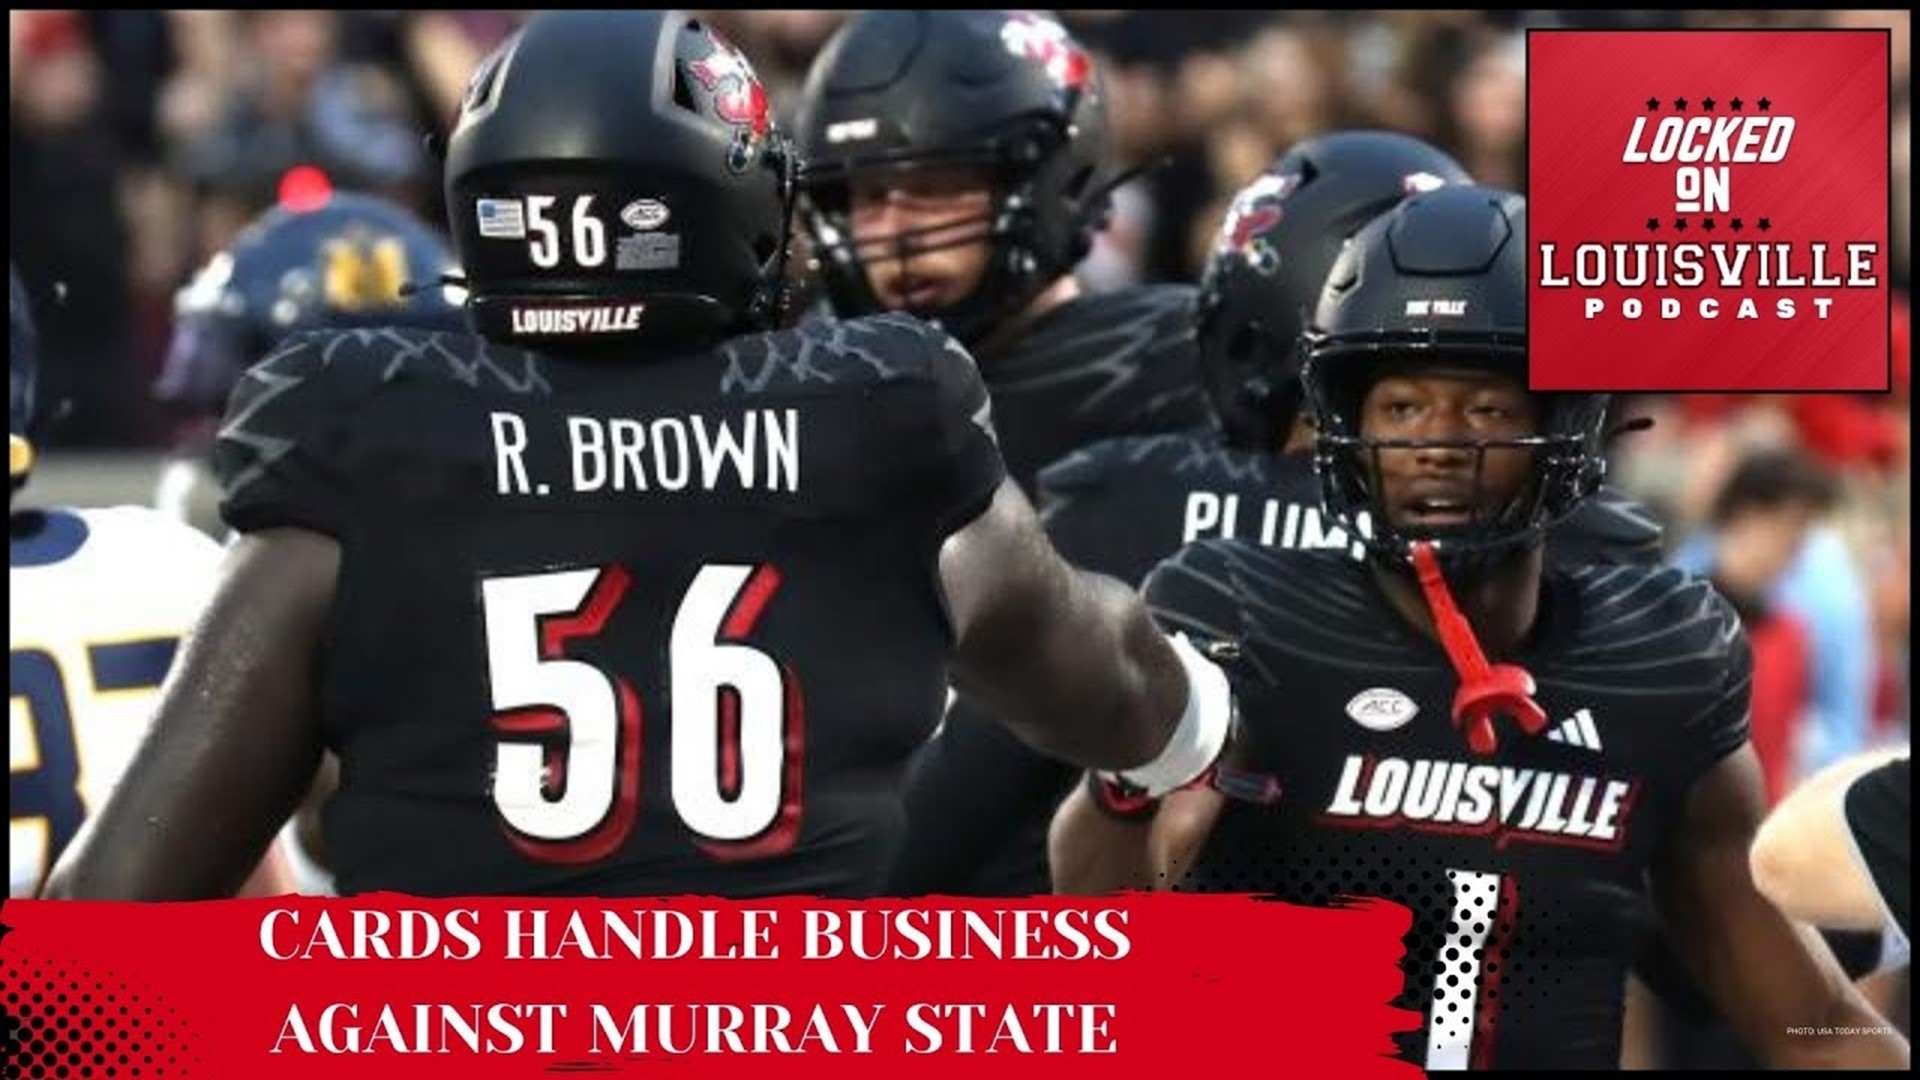 Louisville football: balanced offense & lockdown defense lead to the Cards dominating Murray State